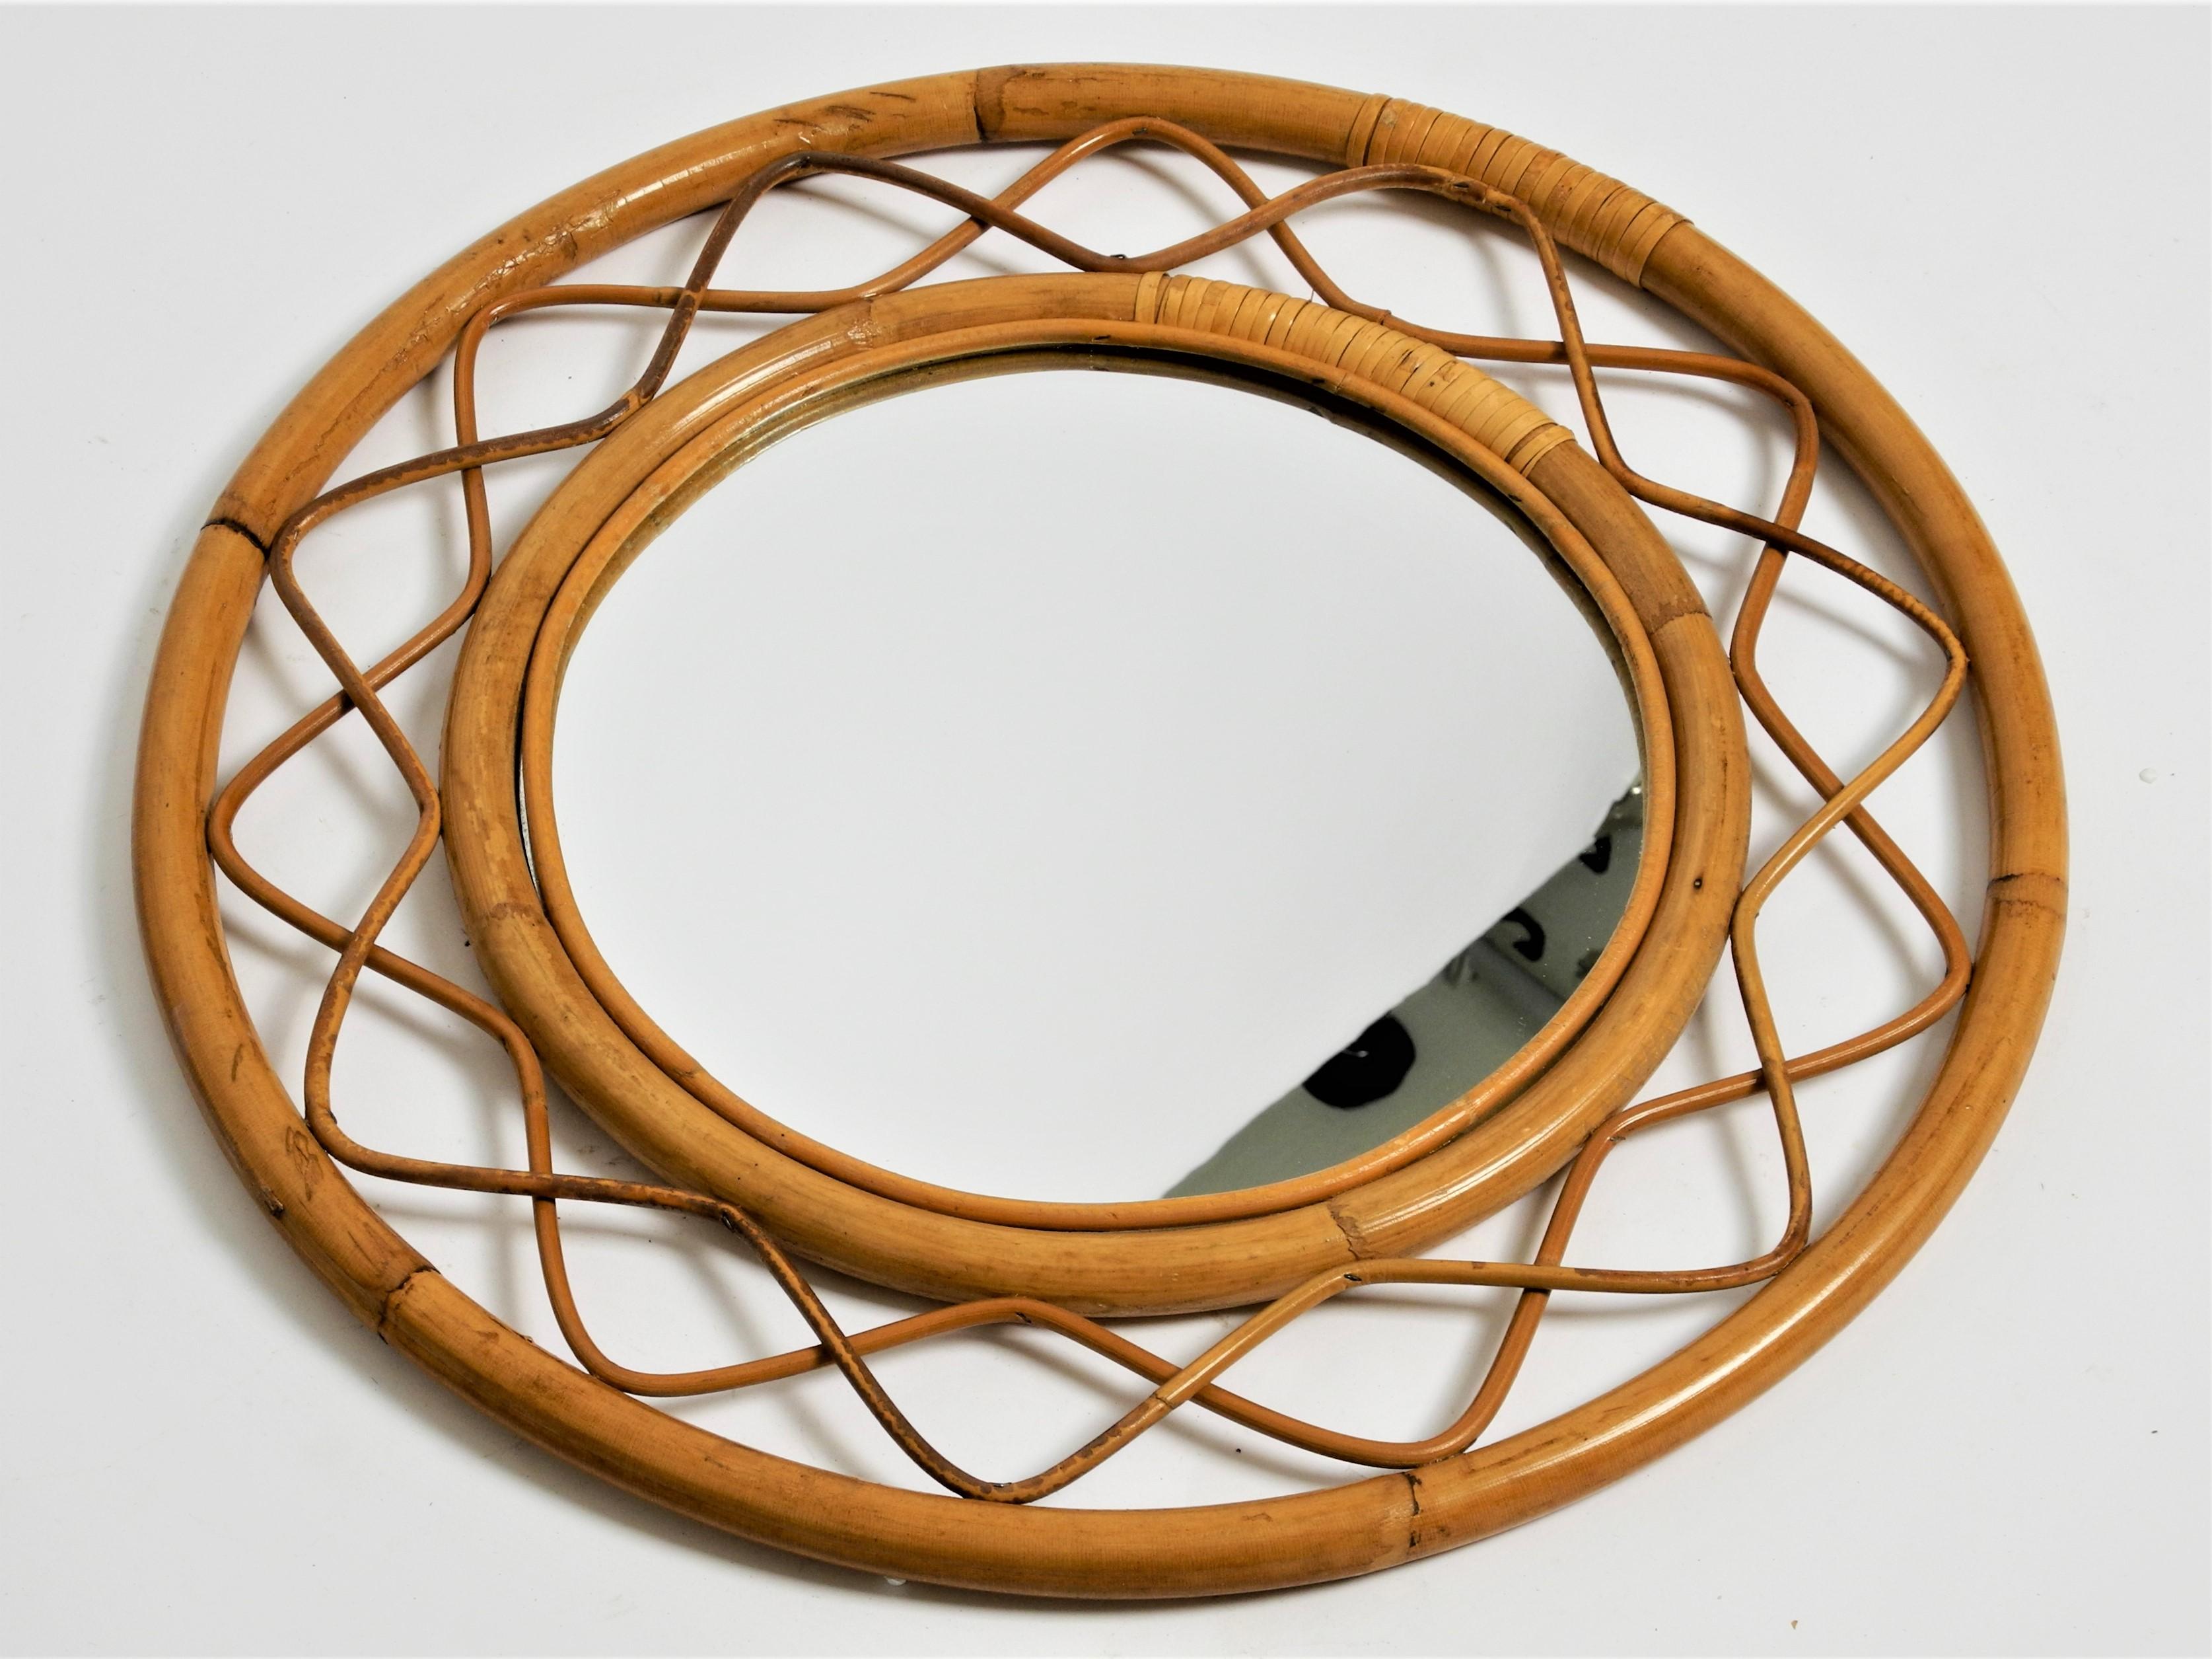 Vintage round bamboo rattan mirror with wooden back panel, Italy, 70s.

Dimensions:
Total diameter 50cm/19,7inch
Diameter of mirror 28,5cm/11,2inch
Depth 2.5cm/1.0inch.

The mirror is in a very good vintage condition with less signs of wear.